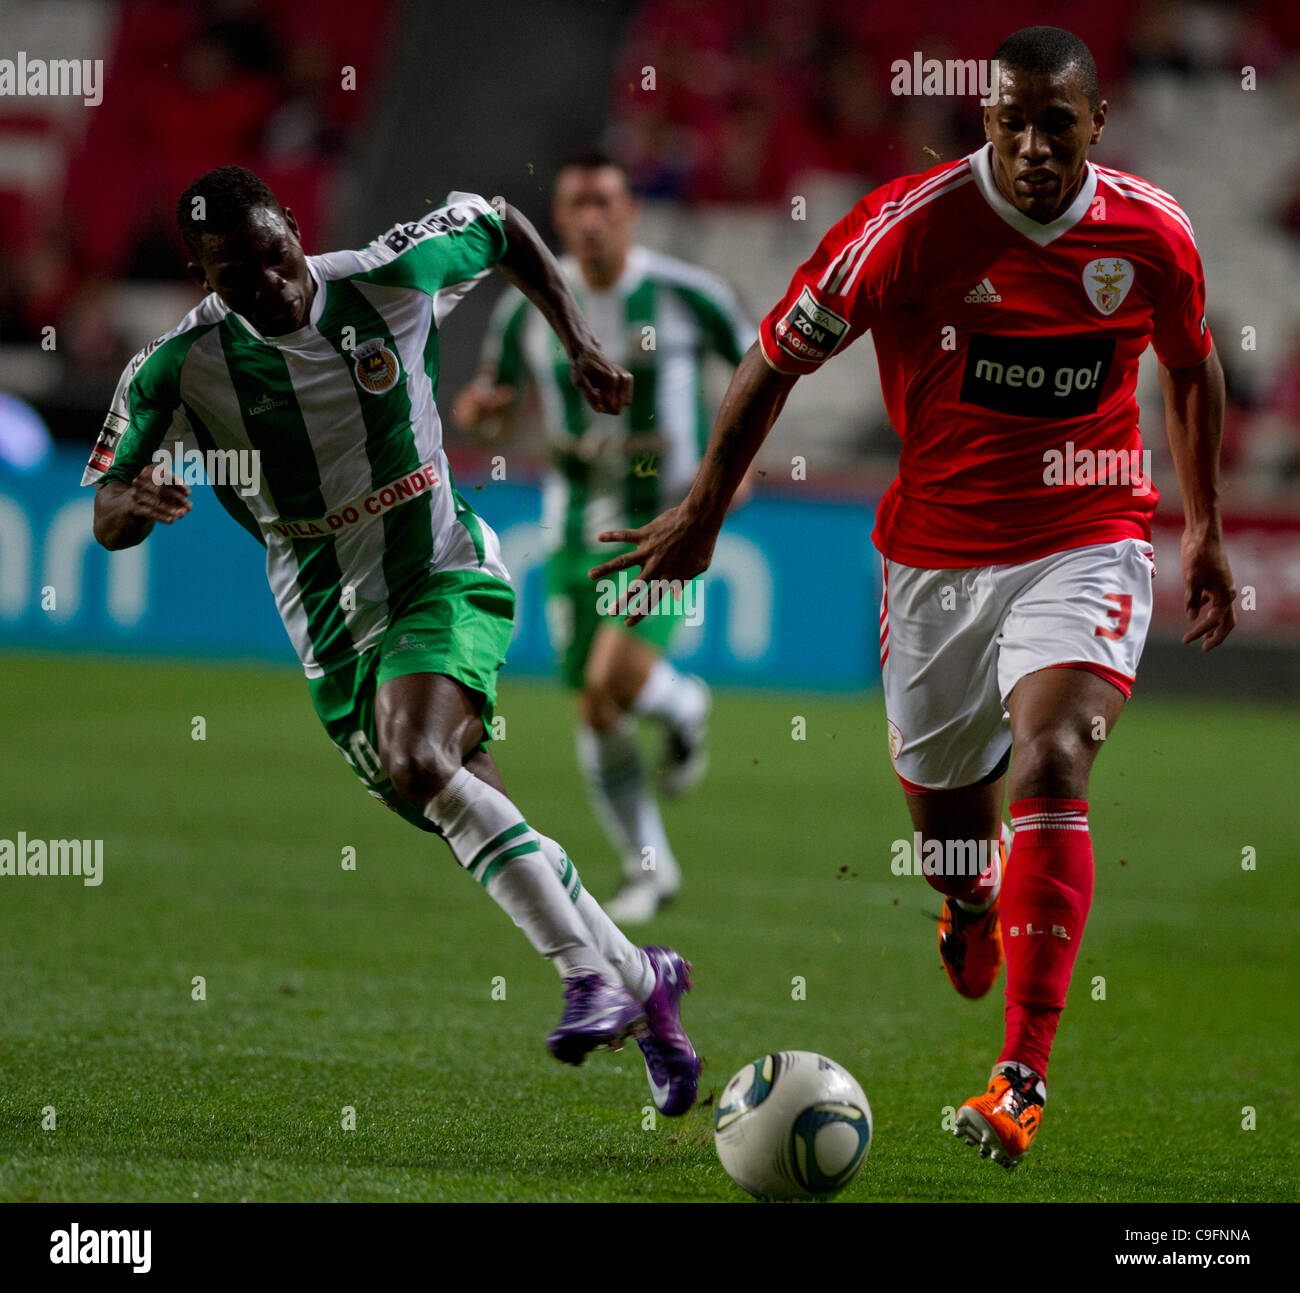 Portugal Liga Zon Sagres 13rd round - SL Benfica (SLB) x Rio Ave FC (RAFC)  Christian Rio Ave FC Forward (L)  (the scorer of the first goal) and Emerson SL Benfica Defender (R) Stock Photo